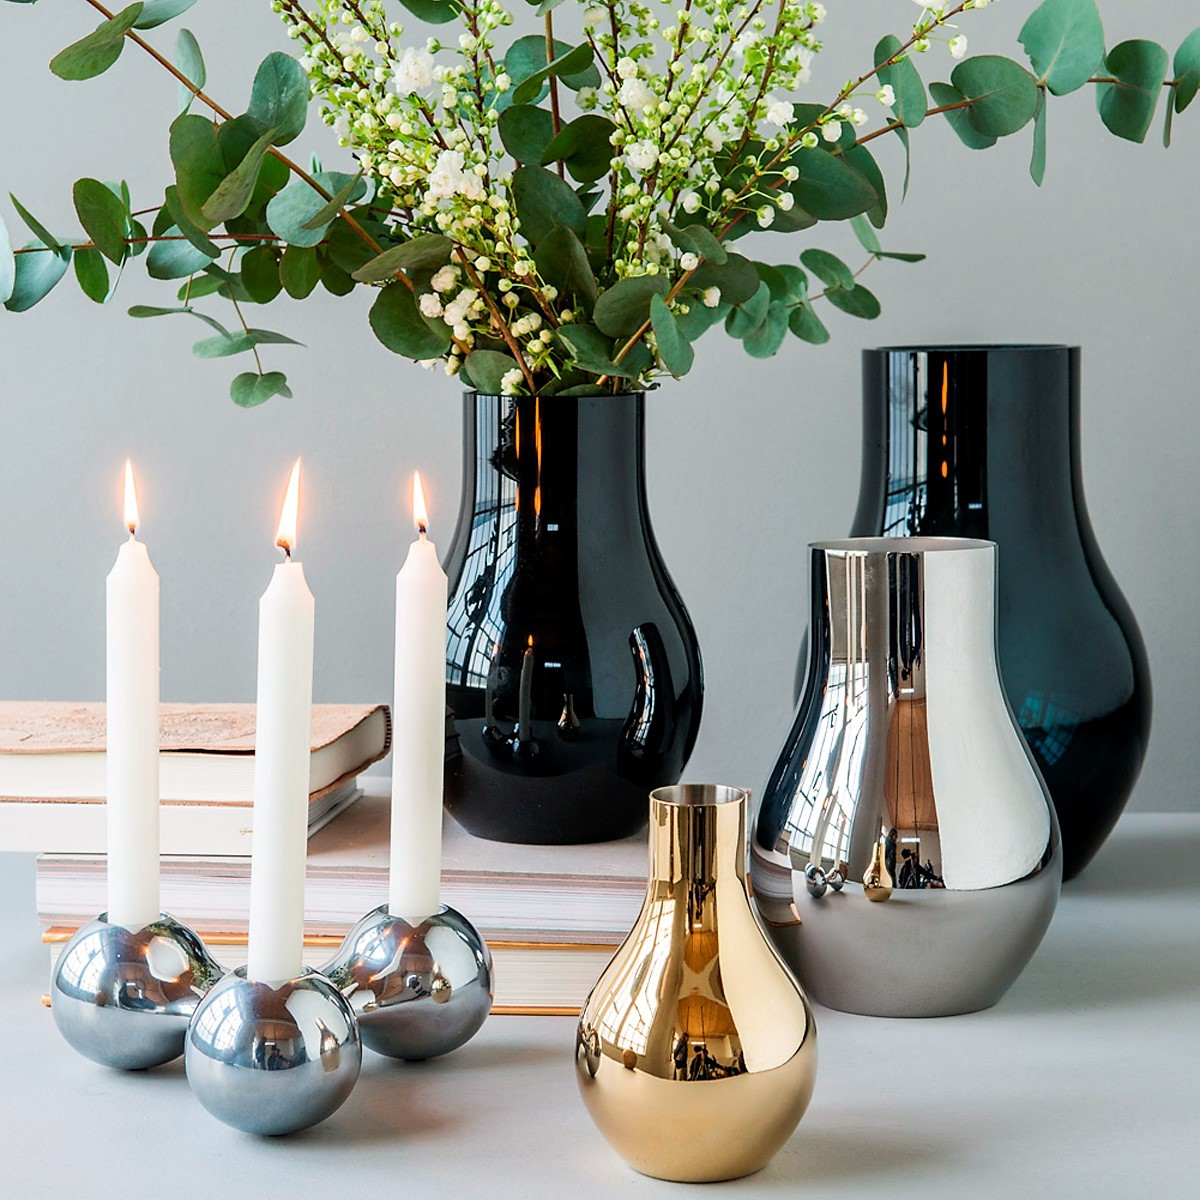 26 Famous Georg Jensen Cafu Vase 2024 free download georg jensen cafu vase of georg jensen tableware vases cafu blue vase regarding georg jensen cafu collection vase glass stainless steel gold plated and candle holder